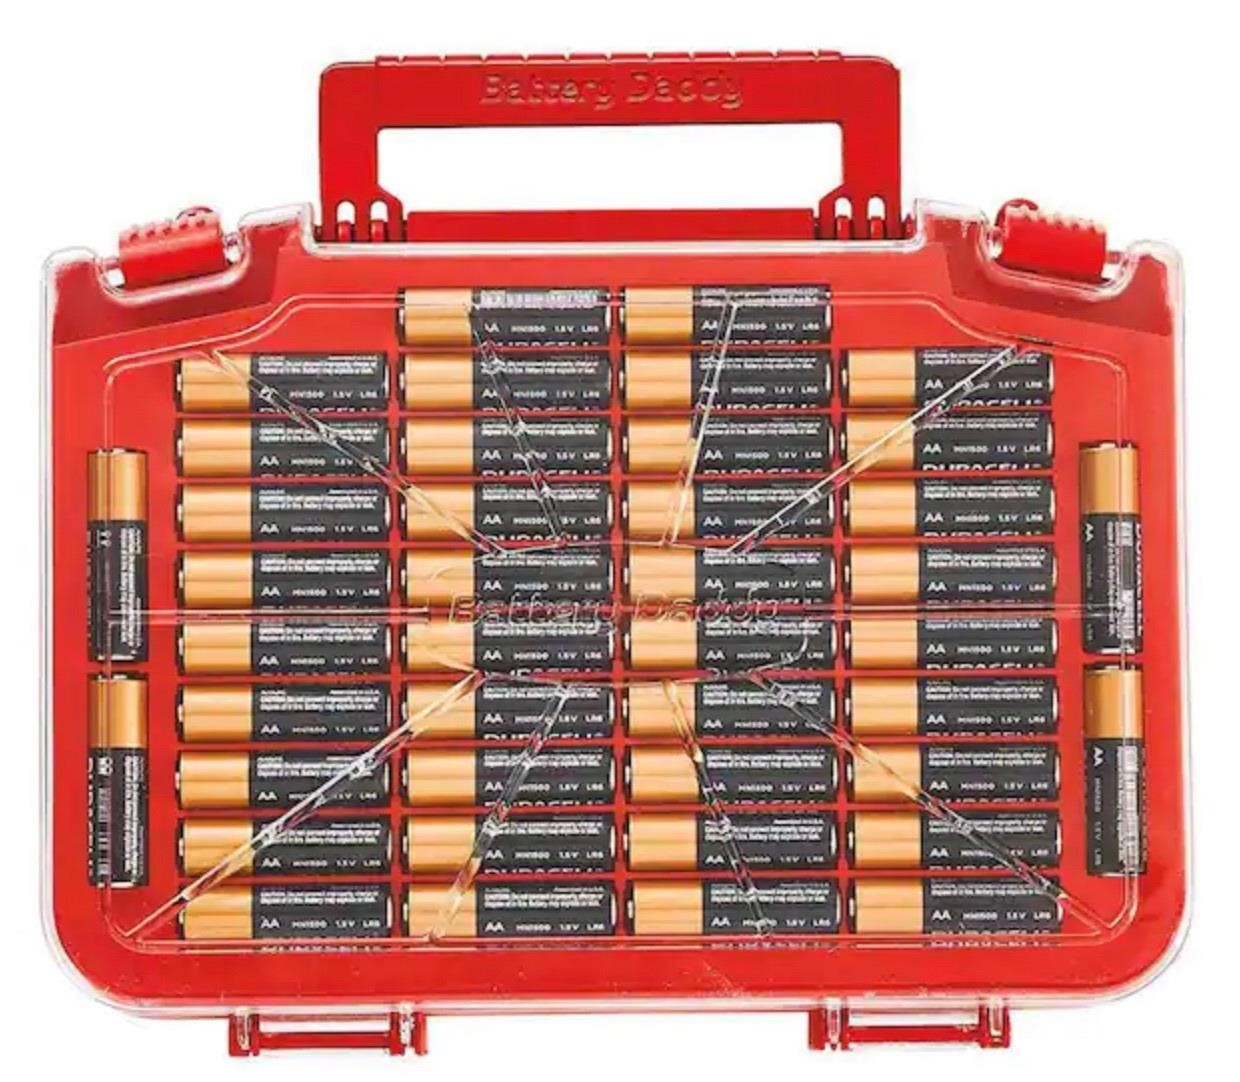 Battery Daddy Battery Organizer and Storage Case